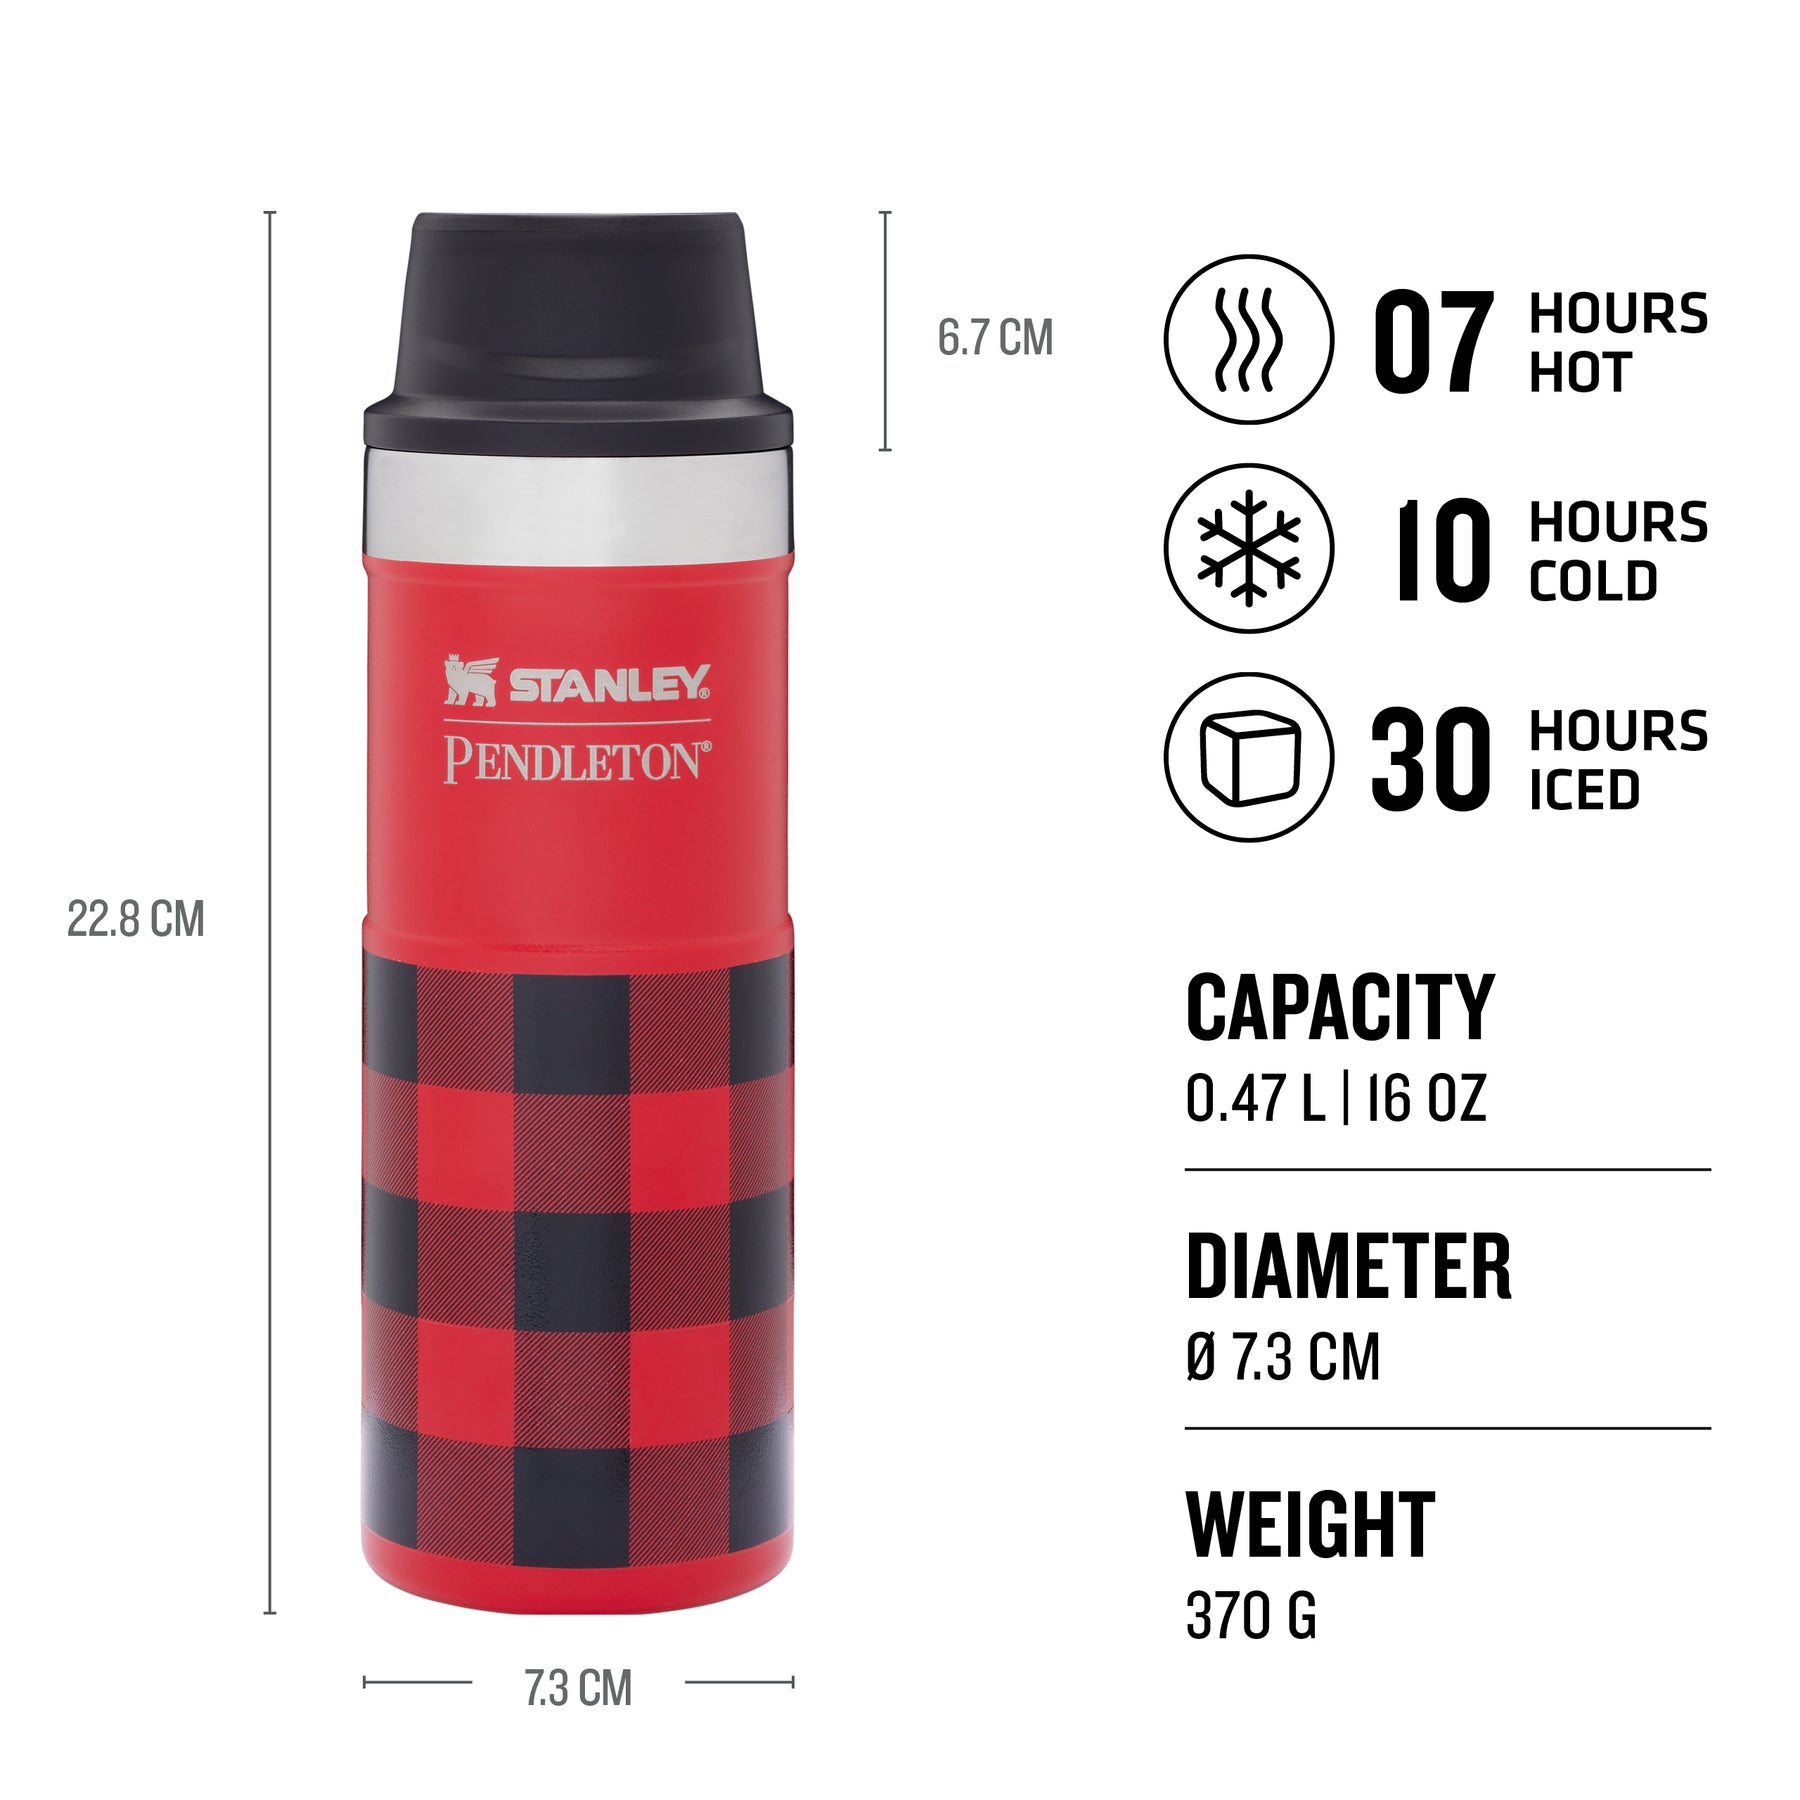 STANLEY Trigger Action Travel Mug 0.25L - Keeps Hot for 3 Hours - BPA-Free  - Thermos Flask for Hot or Cold Drinks - Leakproof Reusable Coffee Cup 